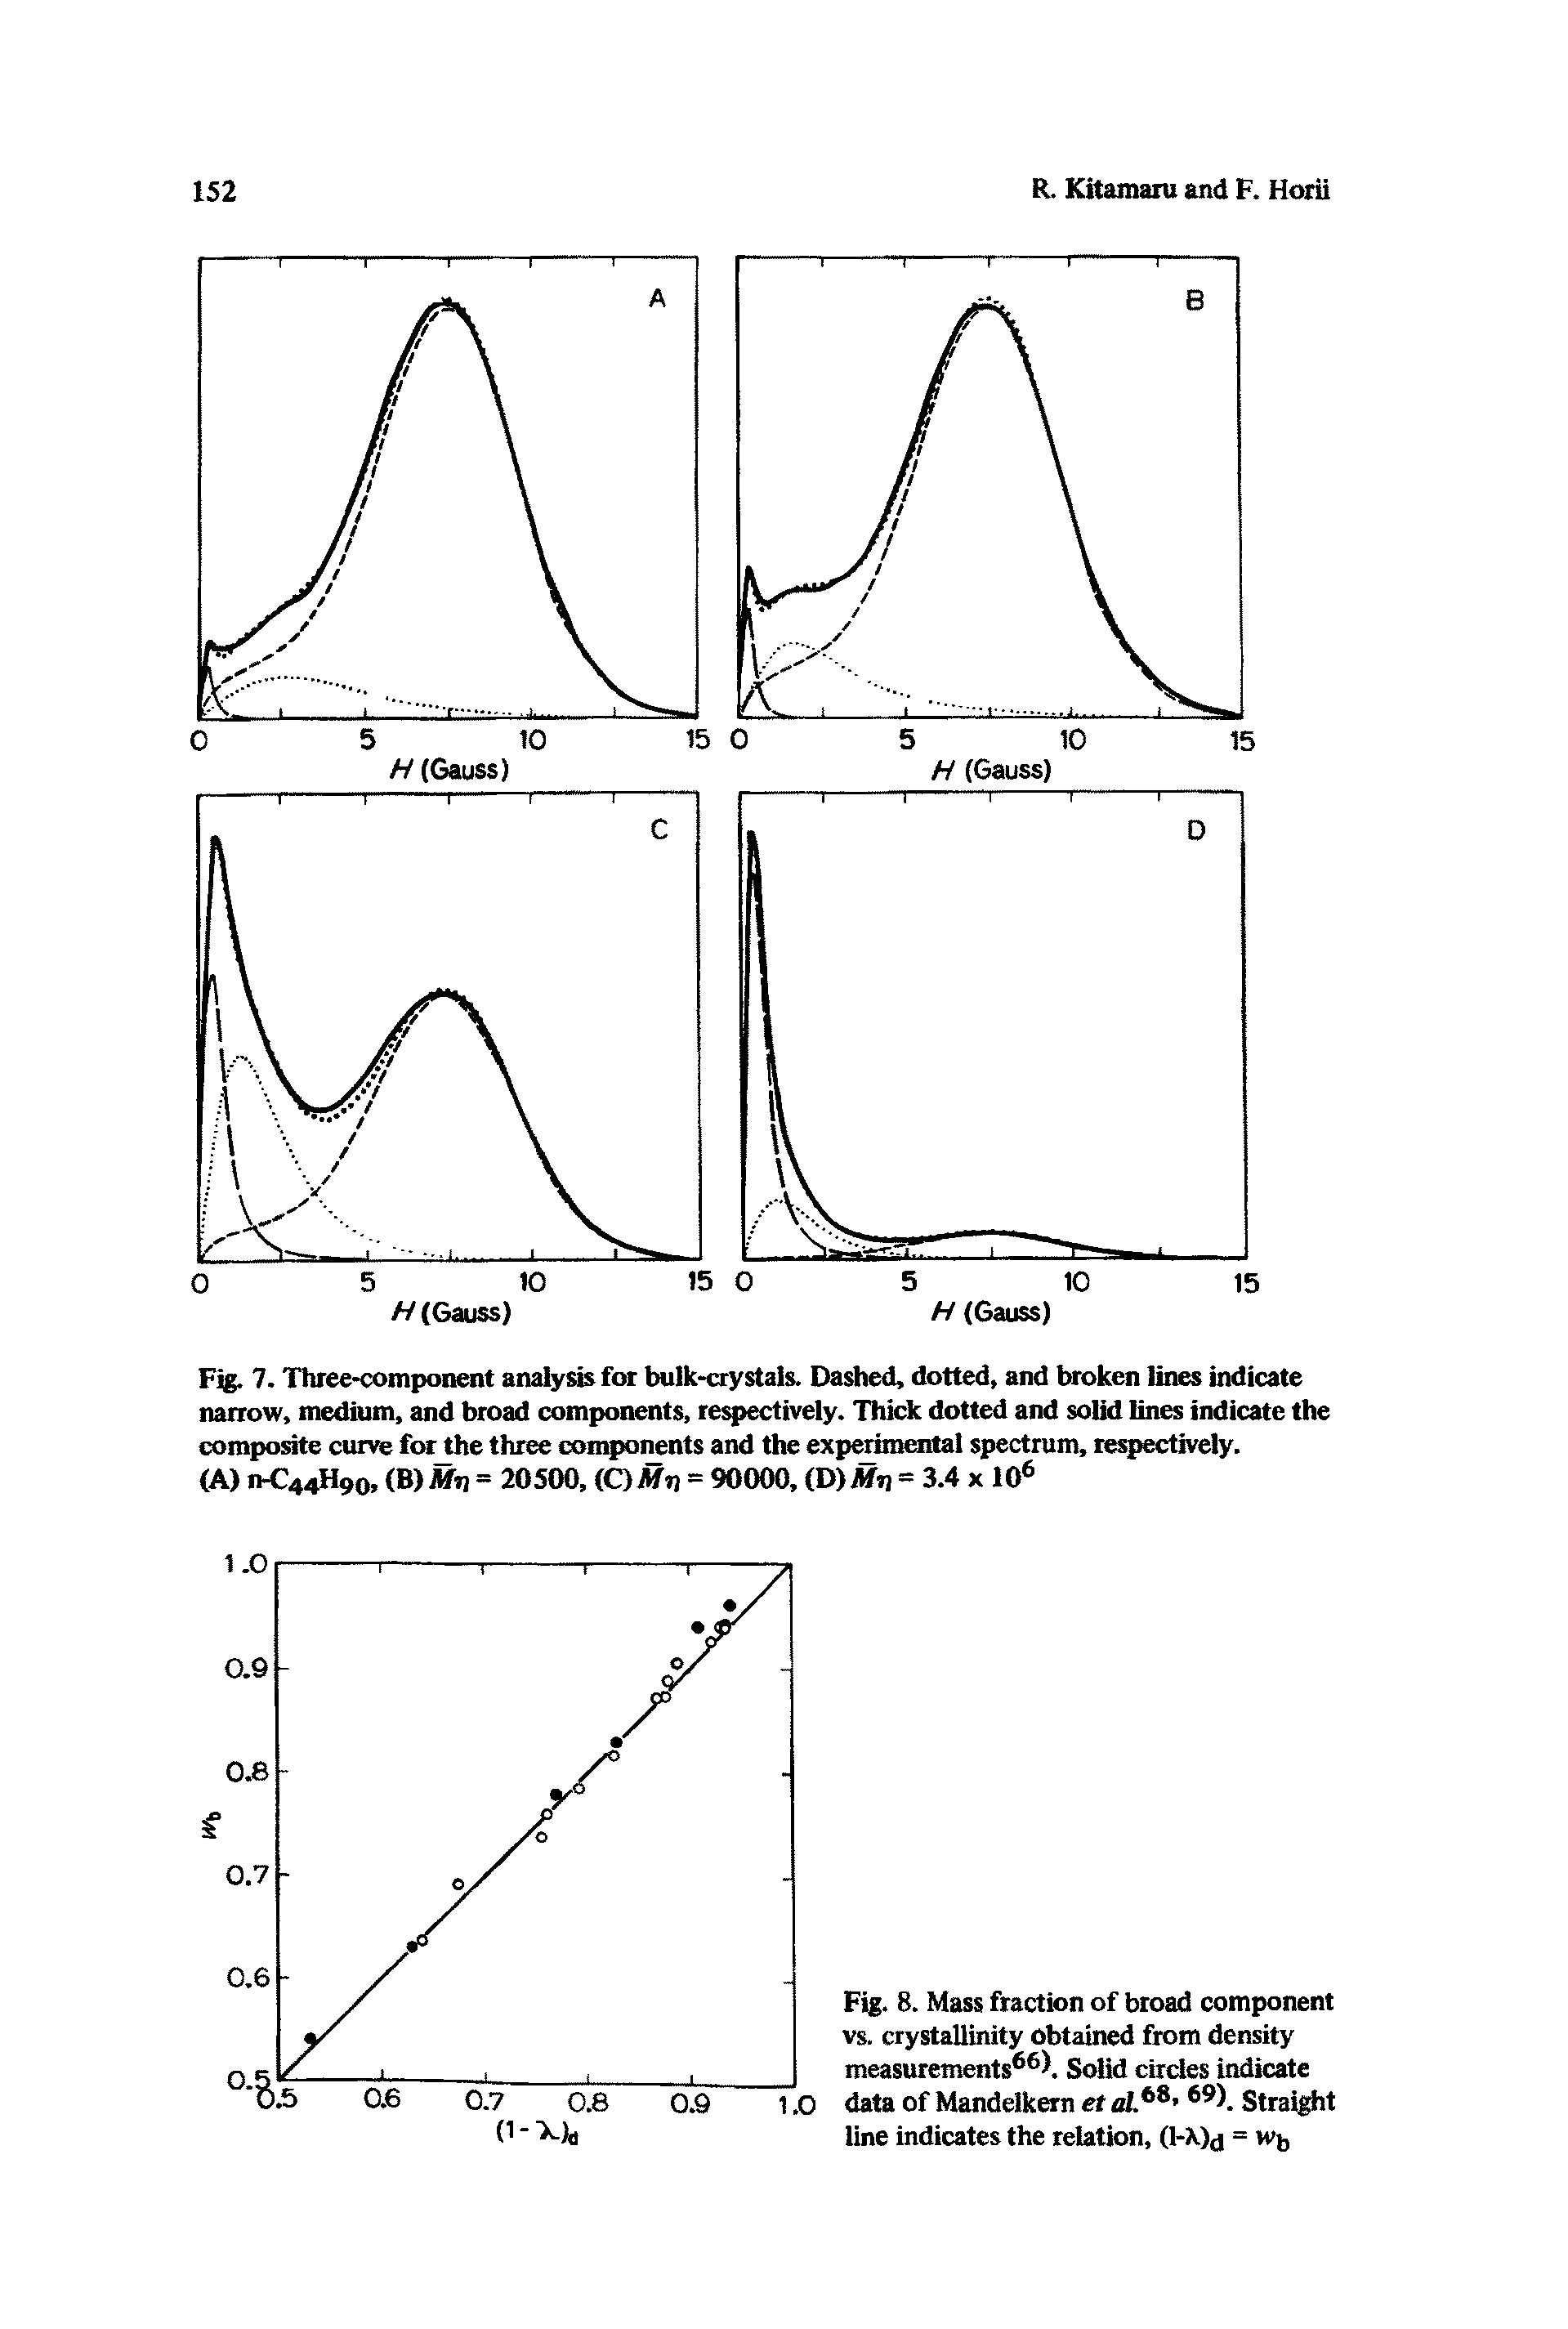 Fig. 8. Mass fraction of broad component vs. crystallinity obtained from density measurements66. Solid circles indicate data of Mandelkern ef ai.68, 69 Straight line indicates the relation, (l-k)<j = W(,...